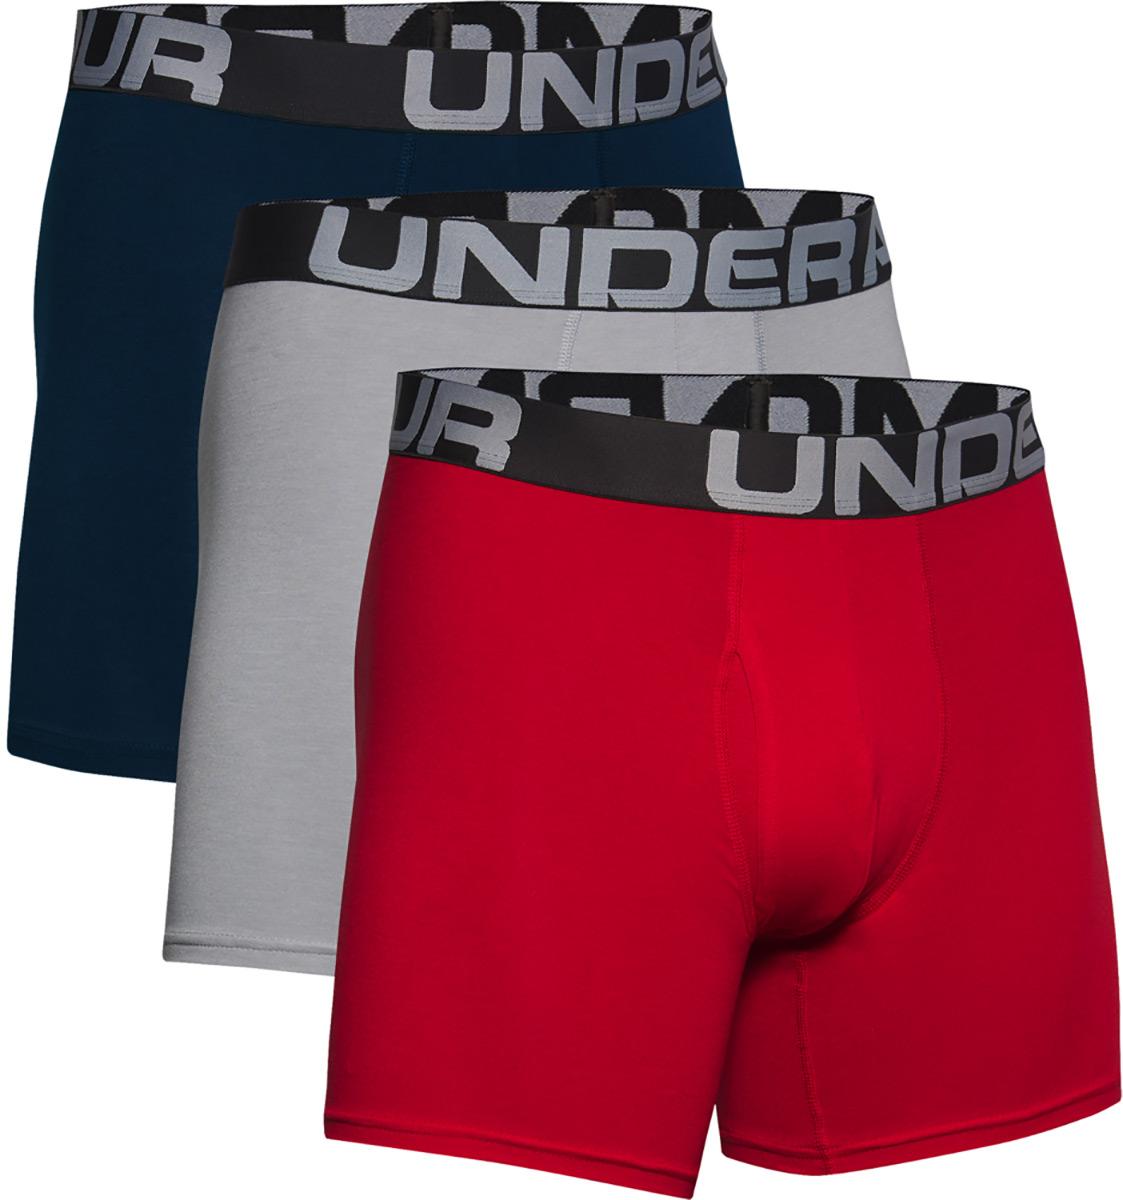 Under Armour Charged Cotton 6 Boxer 3 Pack - Red / Academy / Mod Gray Medium Heather